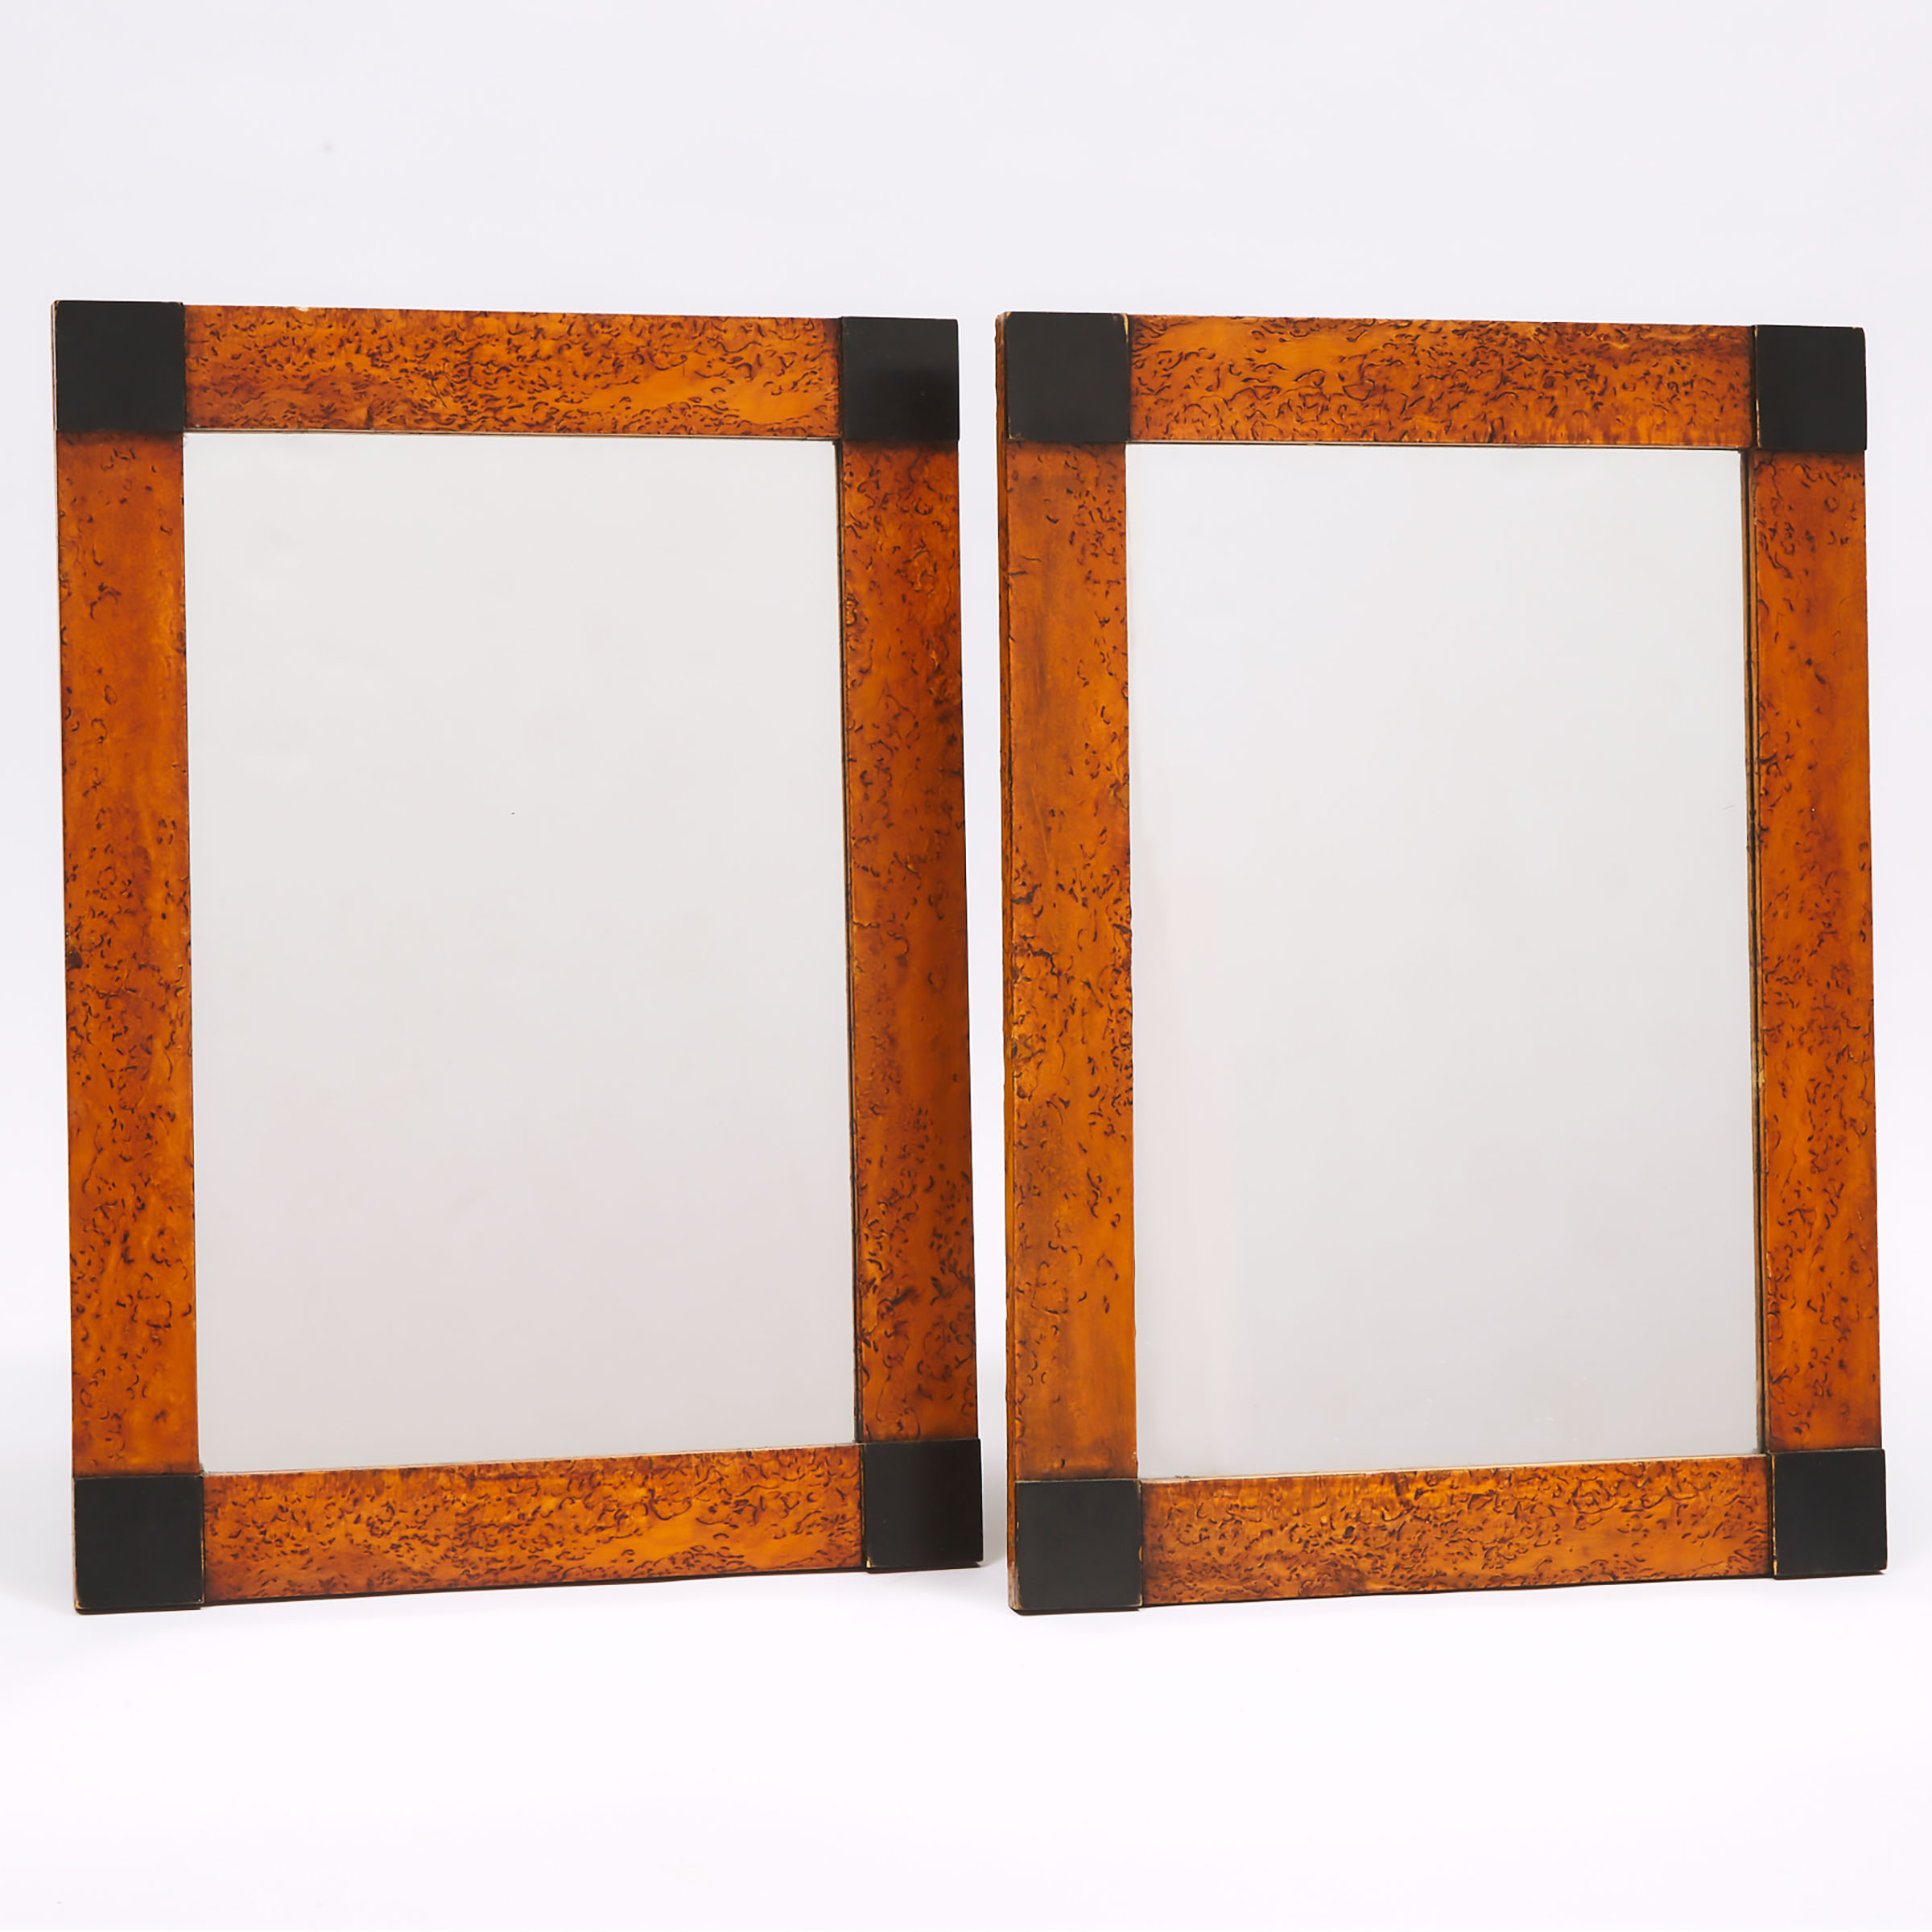 Pair of Burl Walnut Frame Mirrors, early 20th century